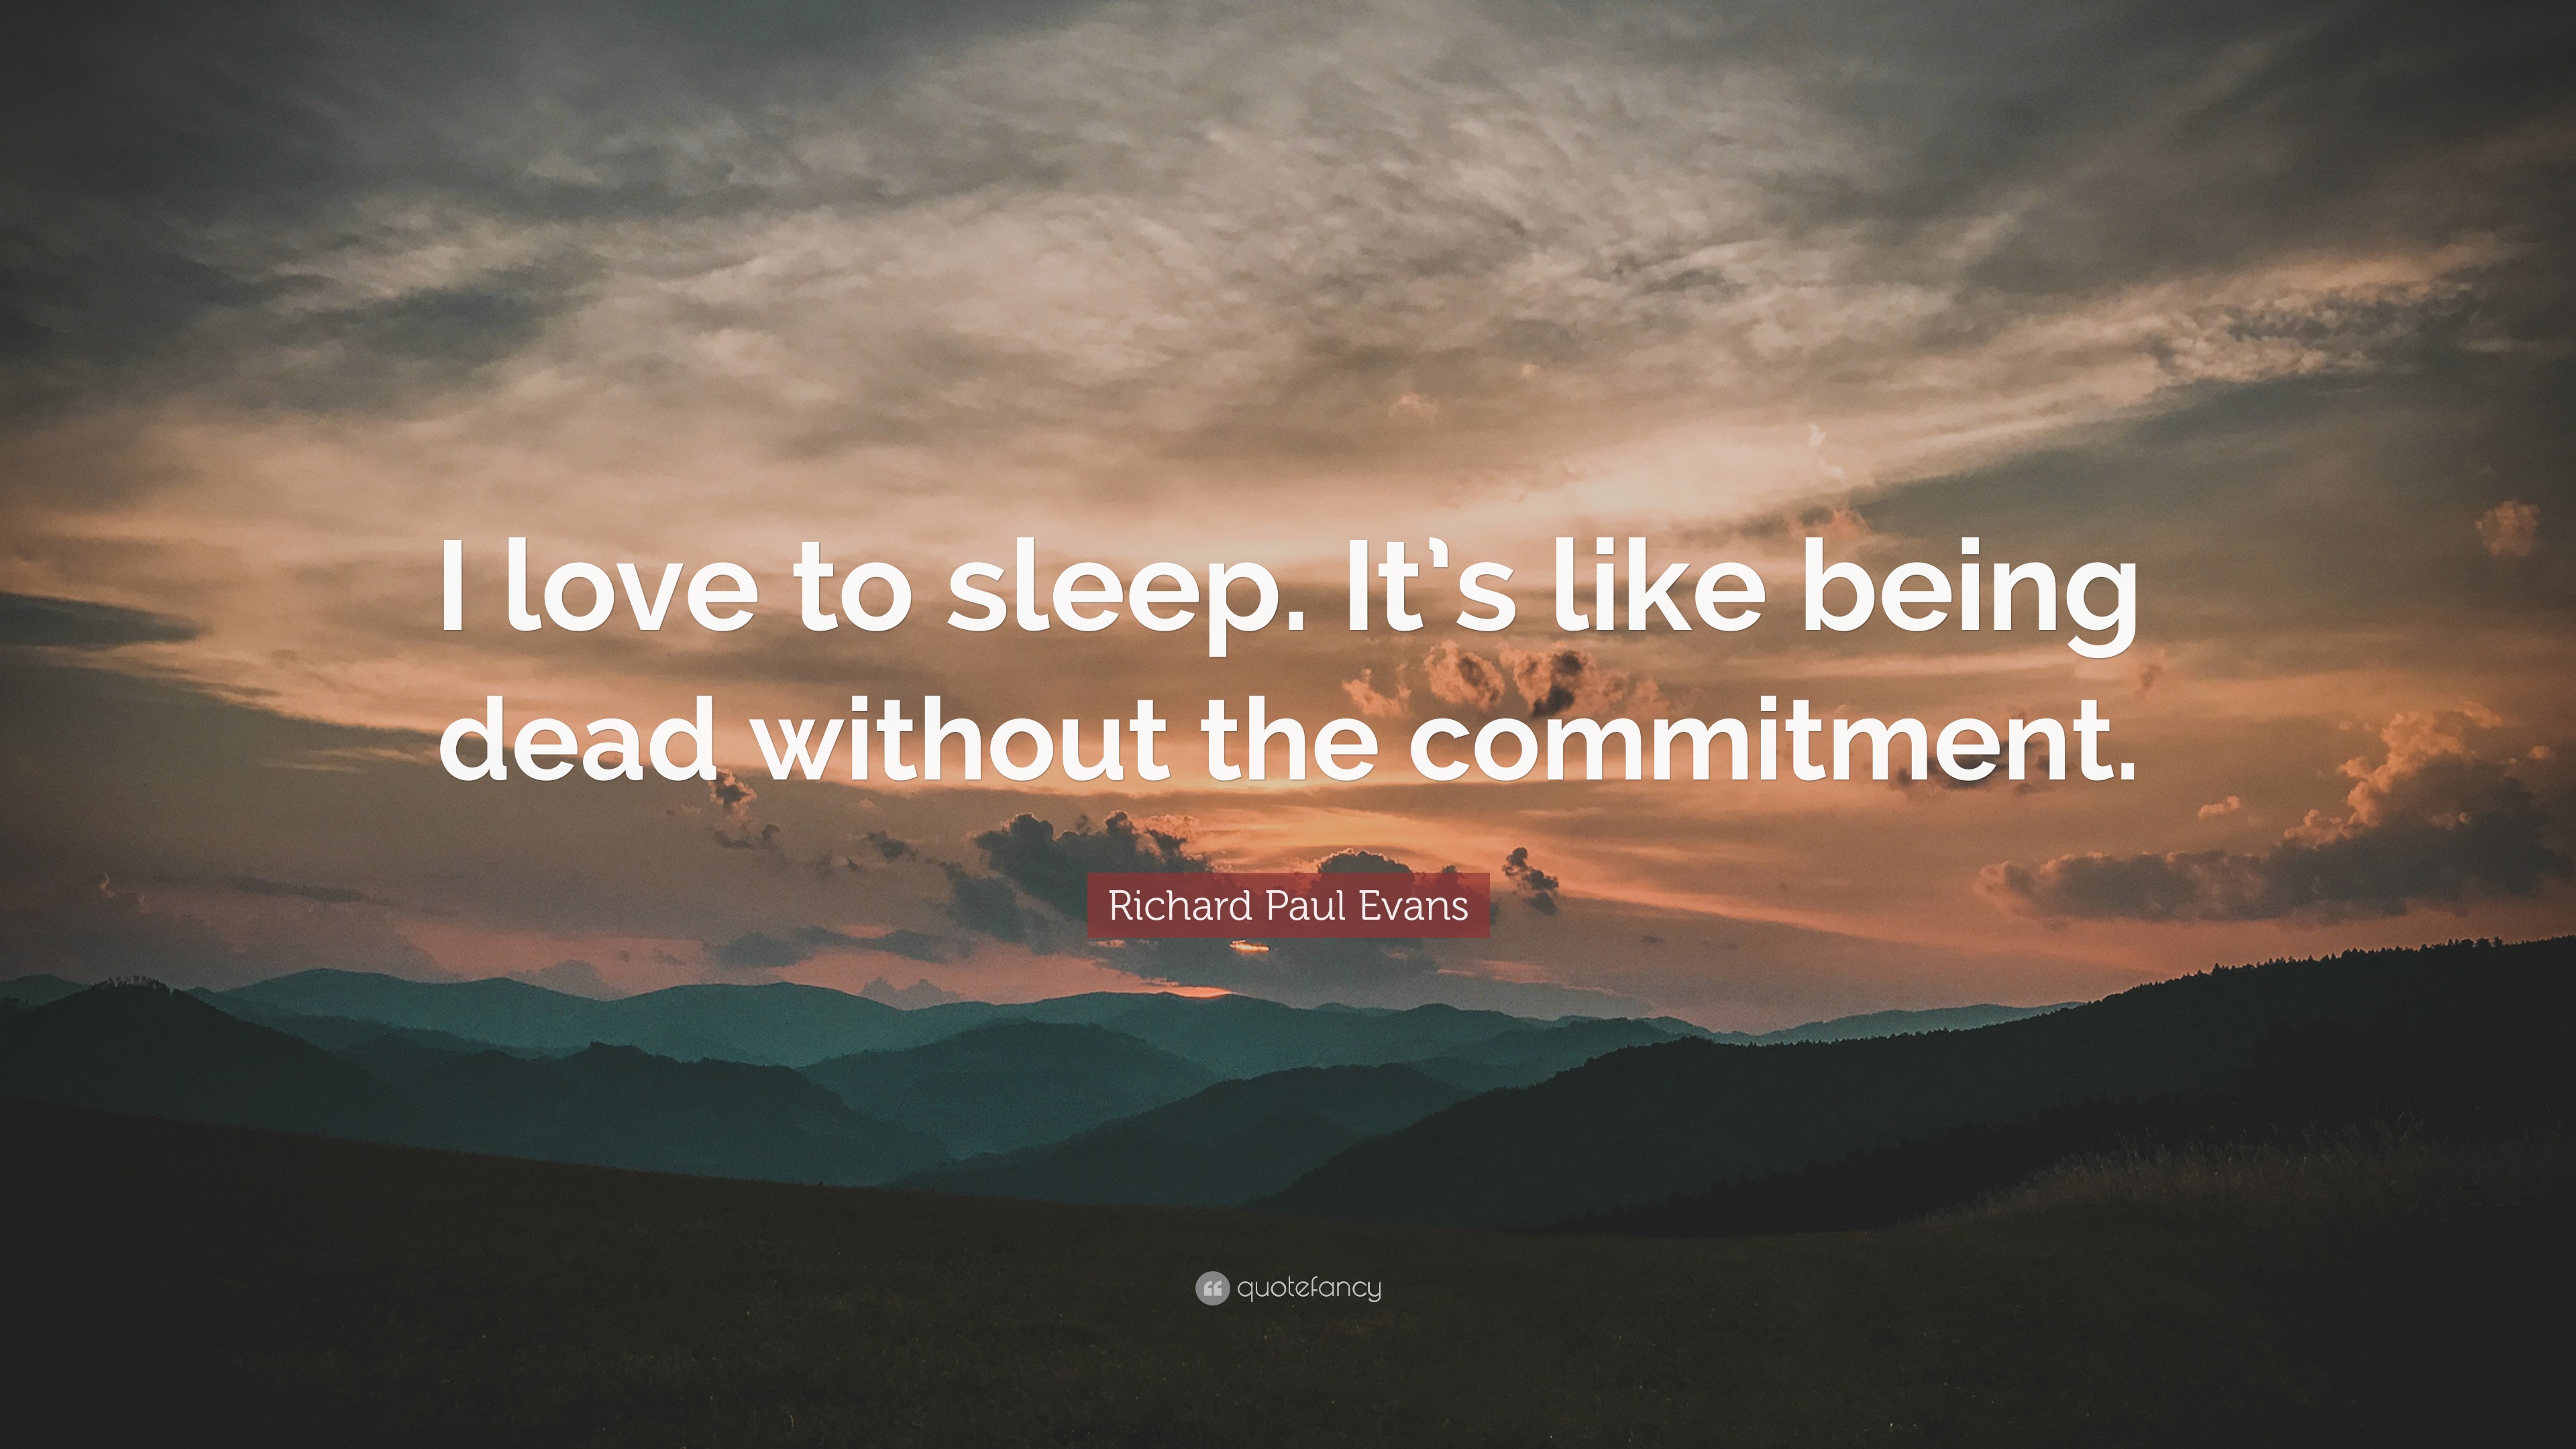 Richard Paul Evans Quote: “I love to sleep. It's like being dead without  the commitment.”